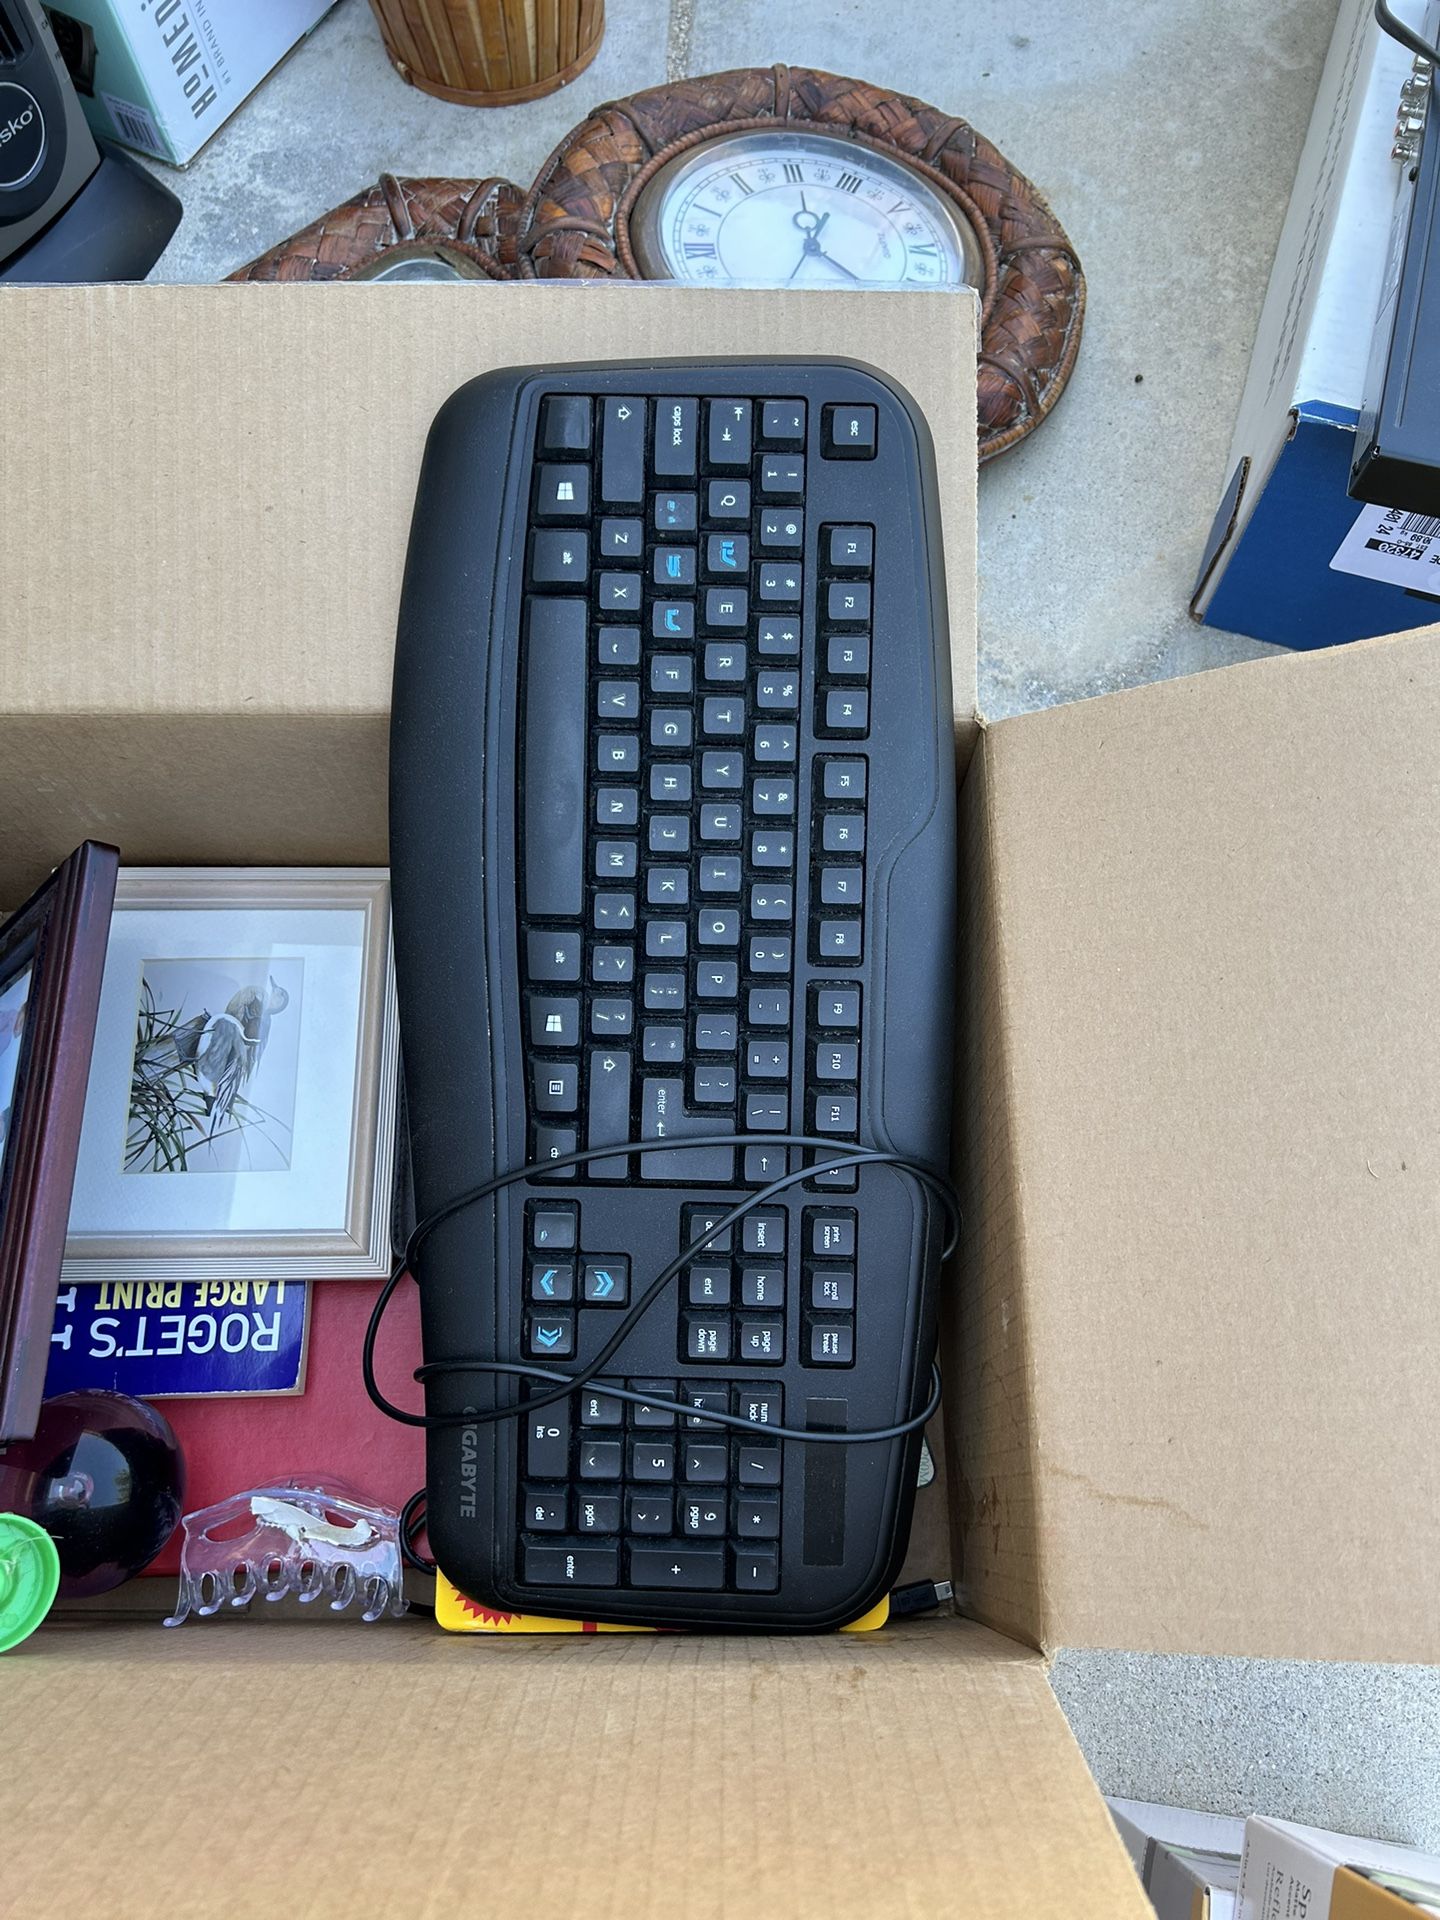 Keyboard Only $3